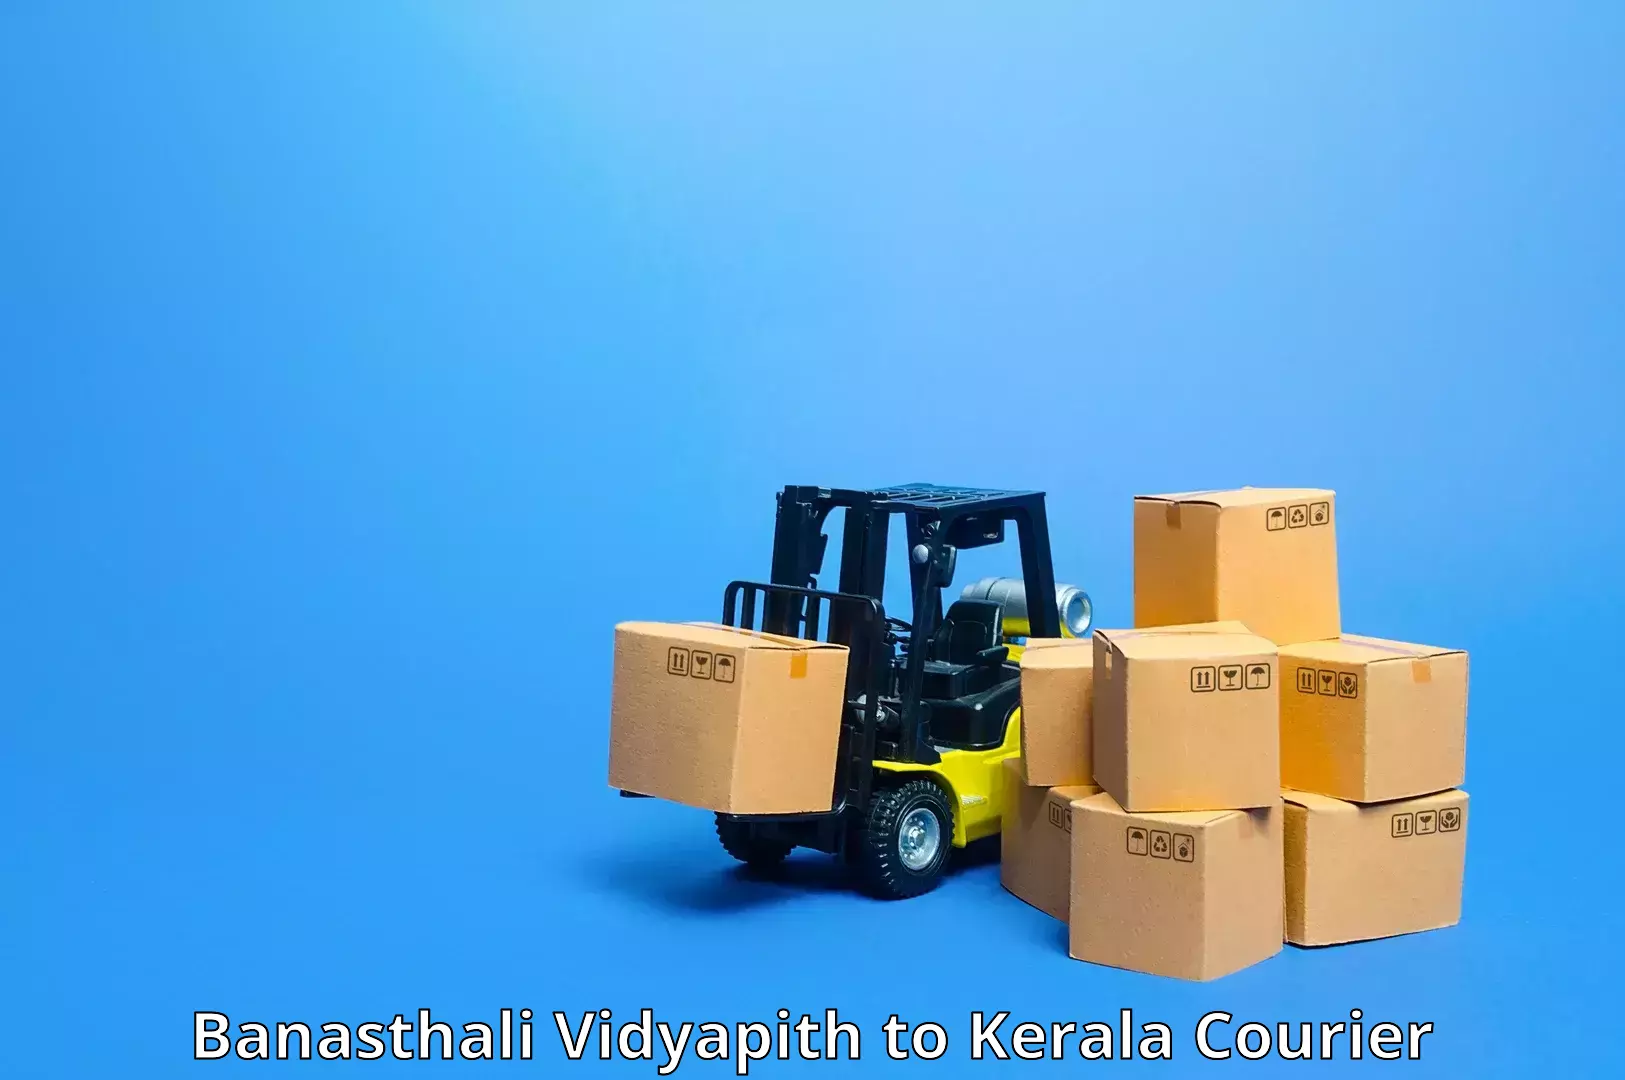 Courier service innovation in Banasthali Vidyapith to Cochin University of Science and Technology